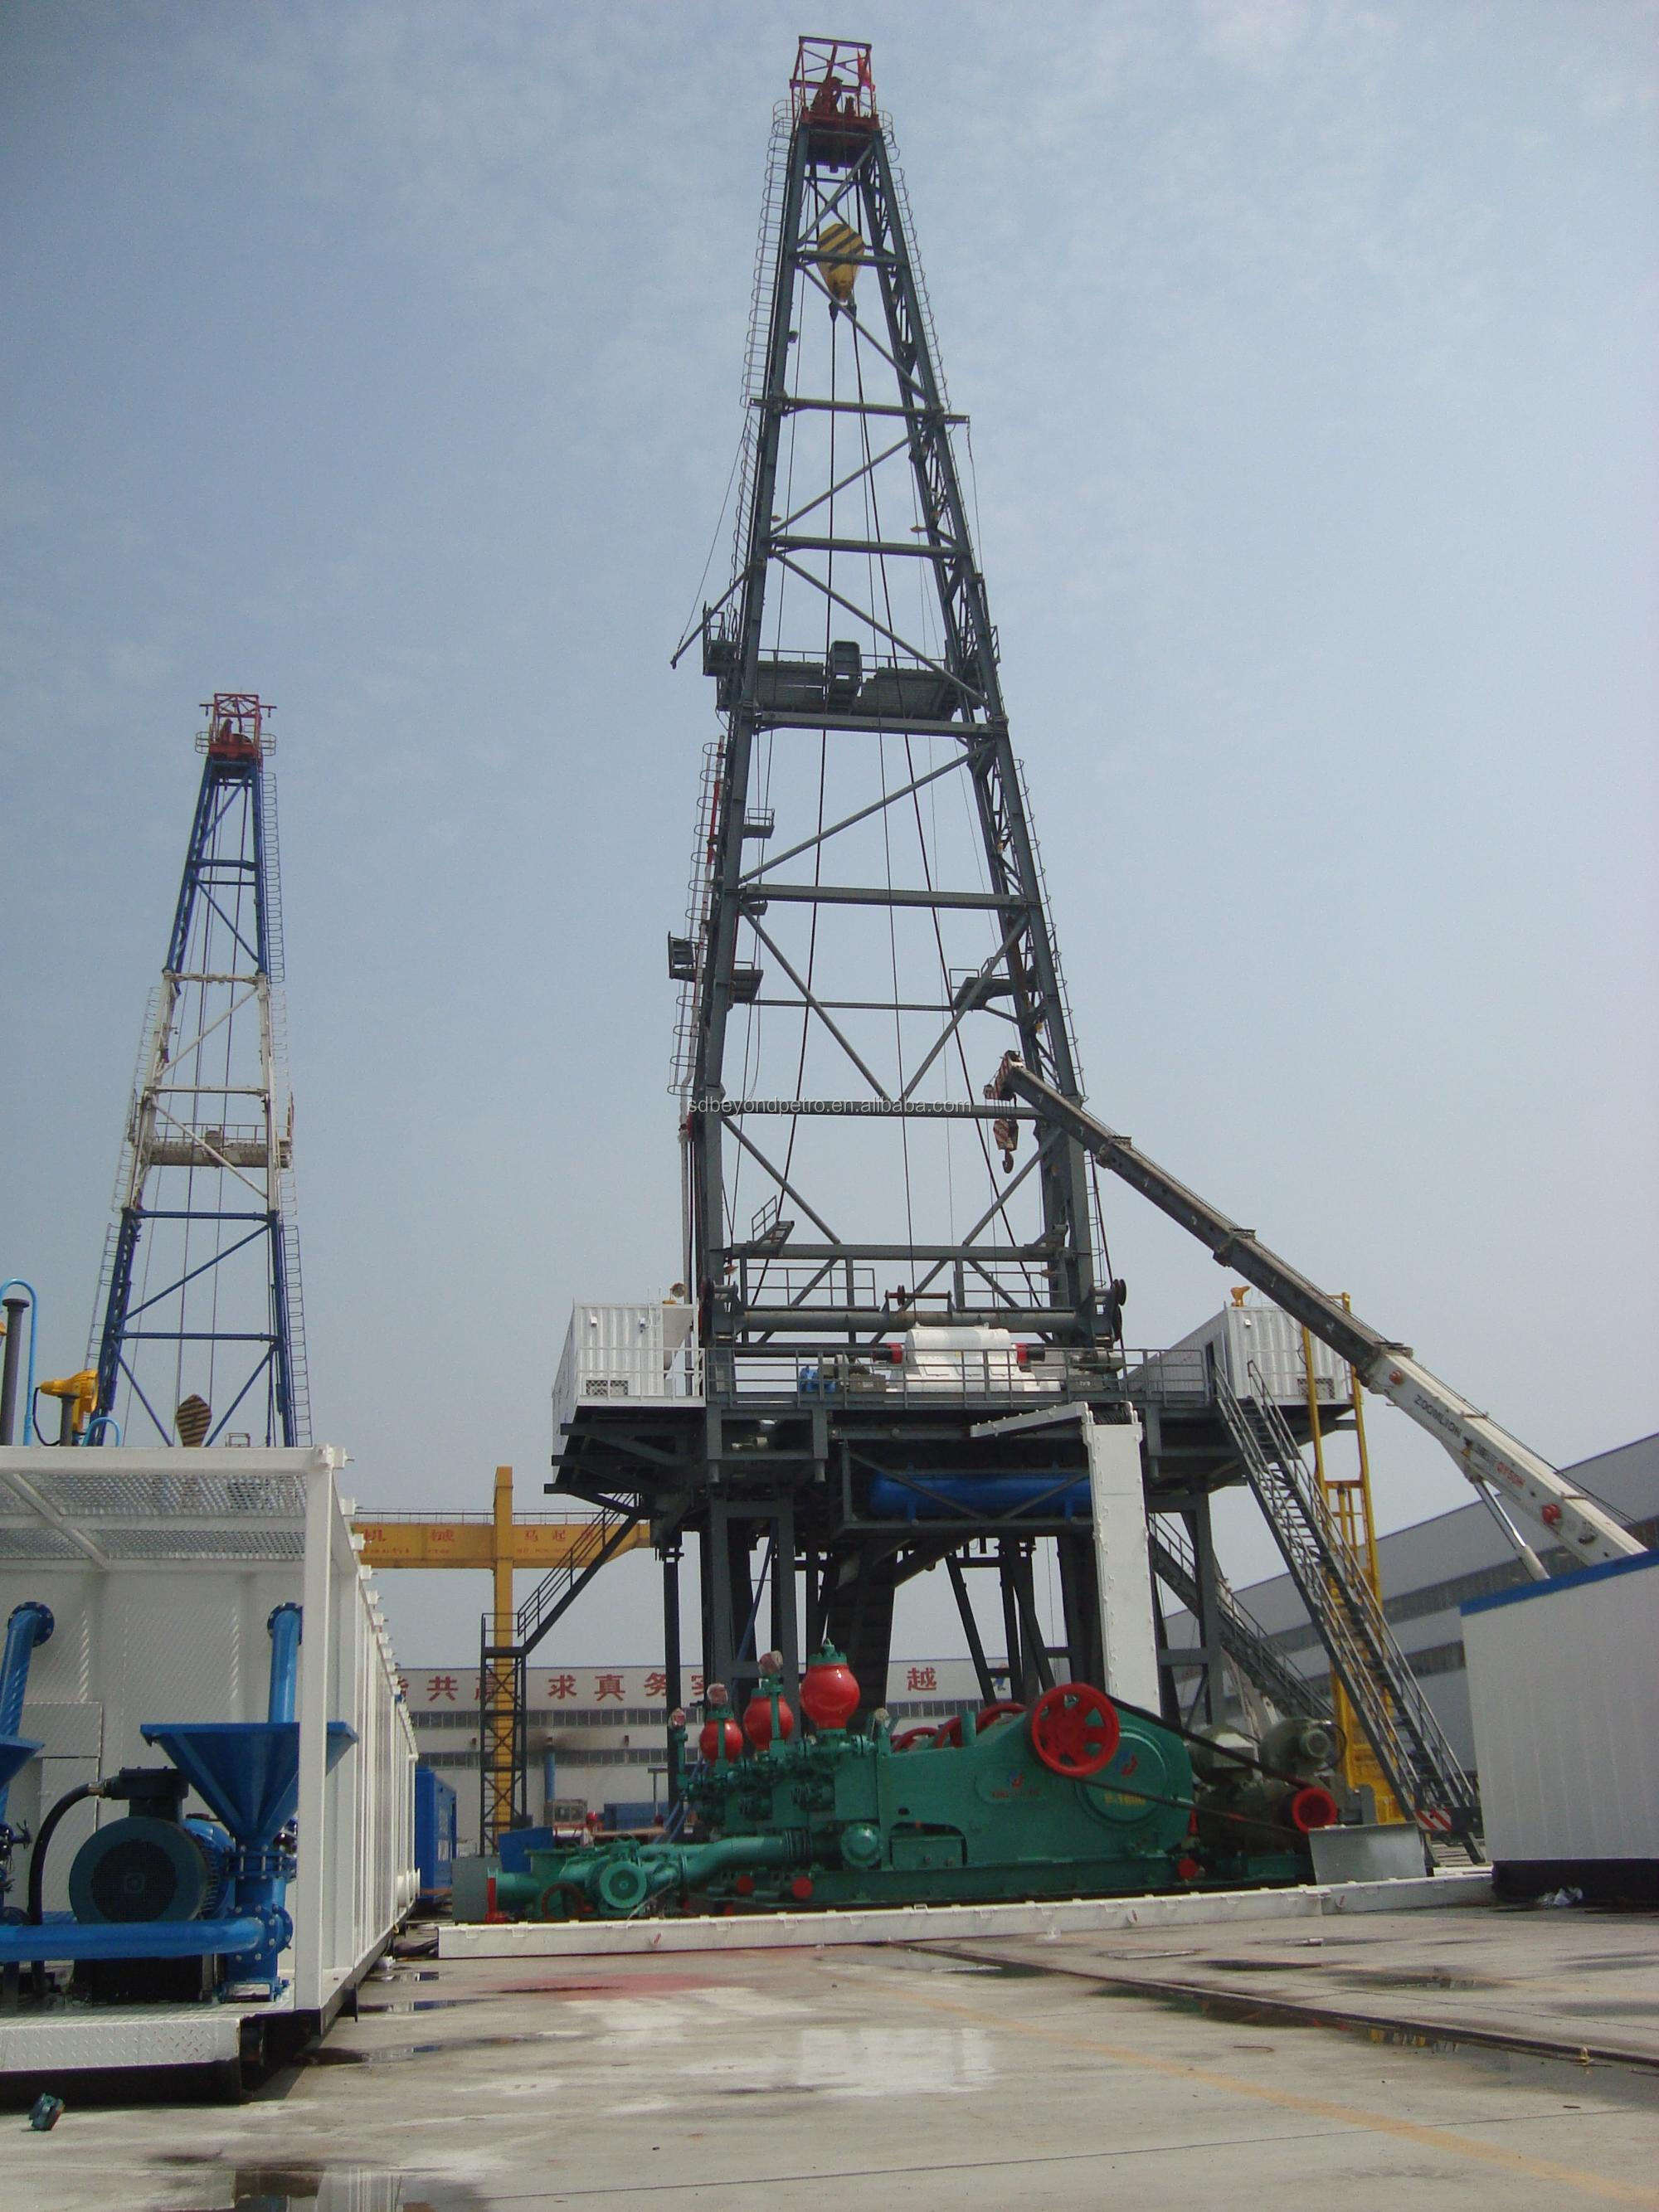 Oilfield Well Oil Drilling Equipment Rig trailer-mounted oil well drill rig for oil well drilling factory